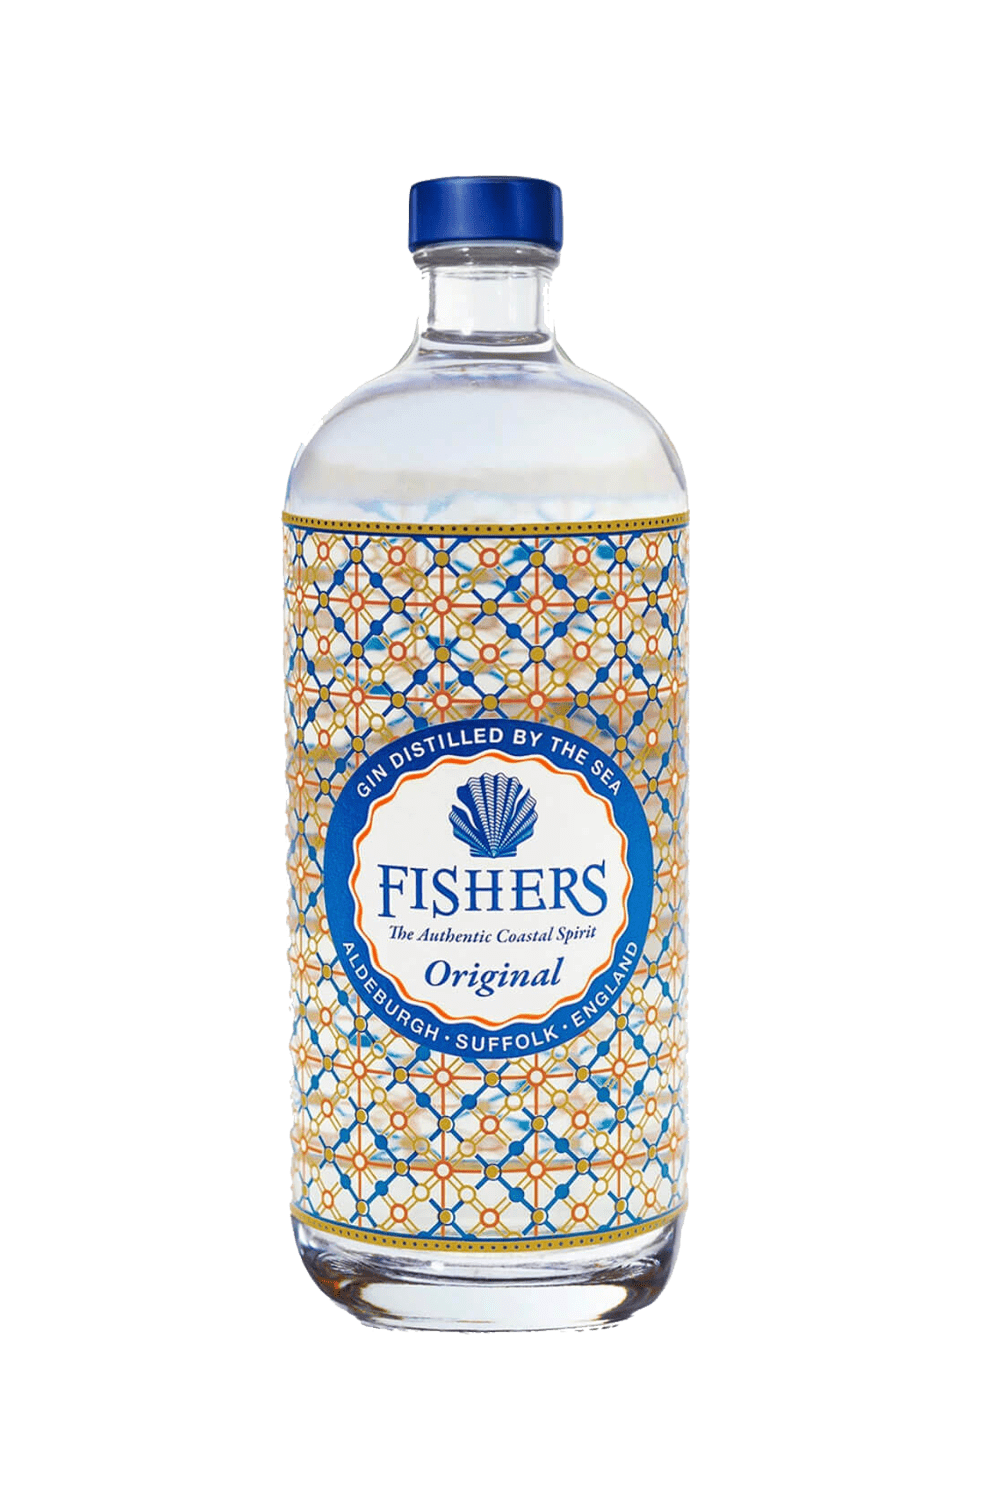 Fishers London Dry Gin